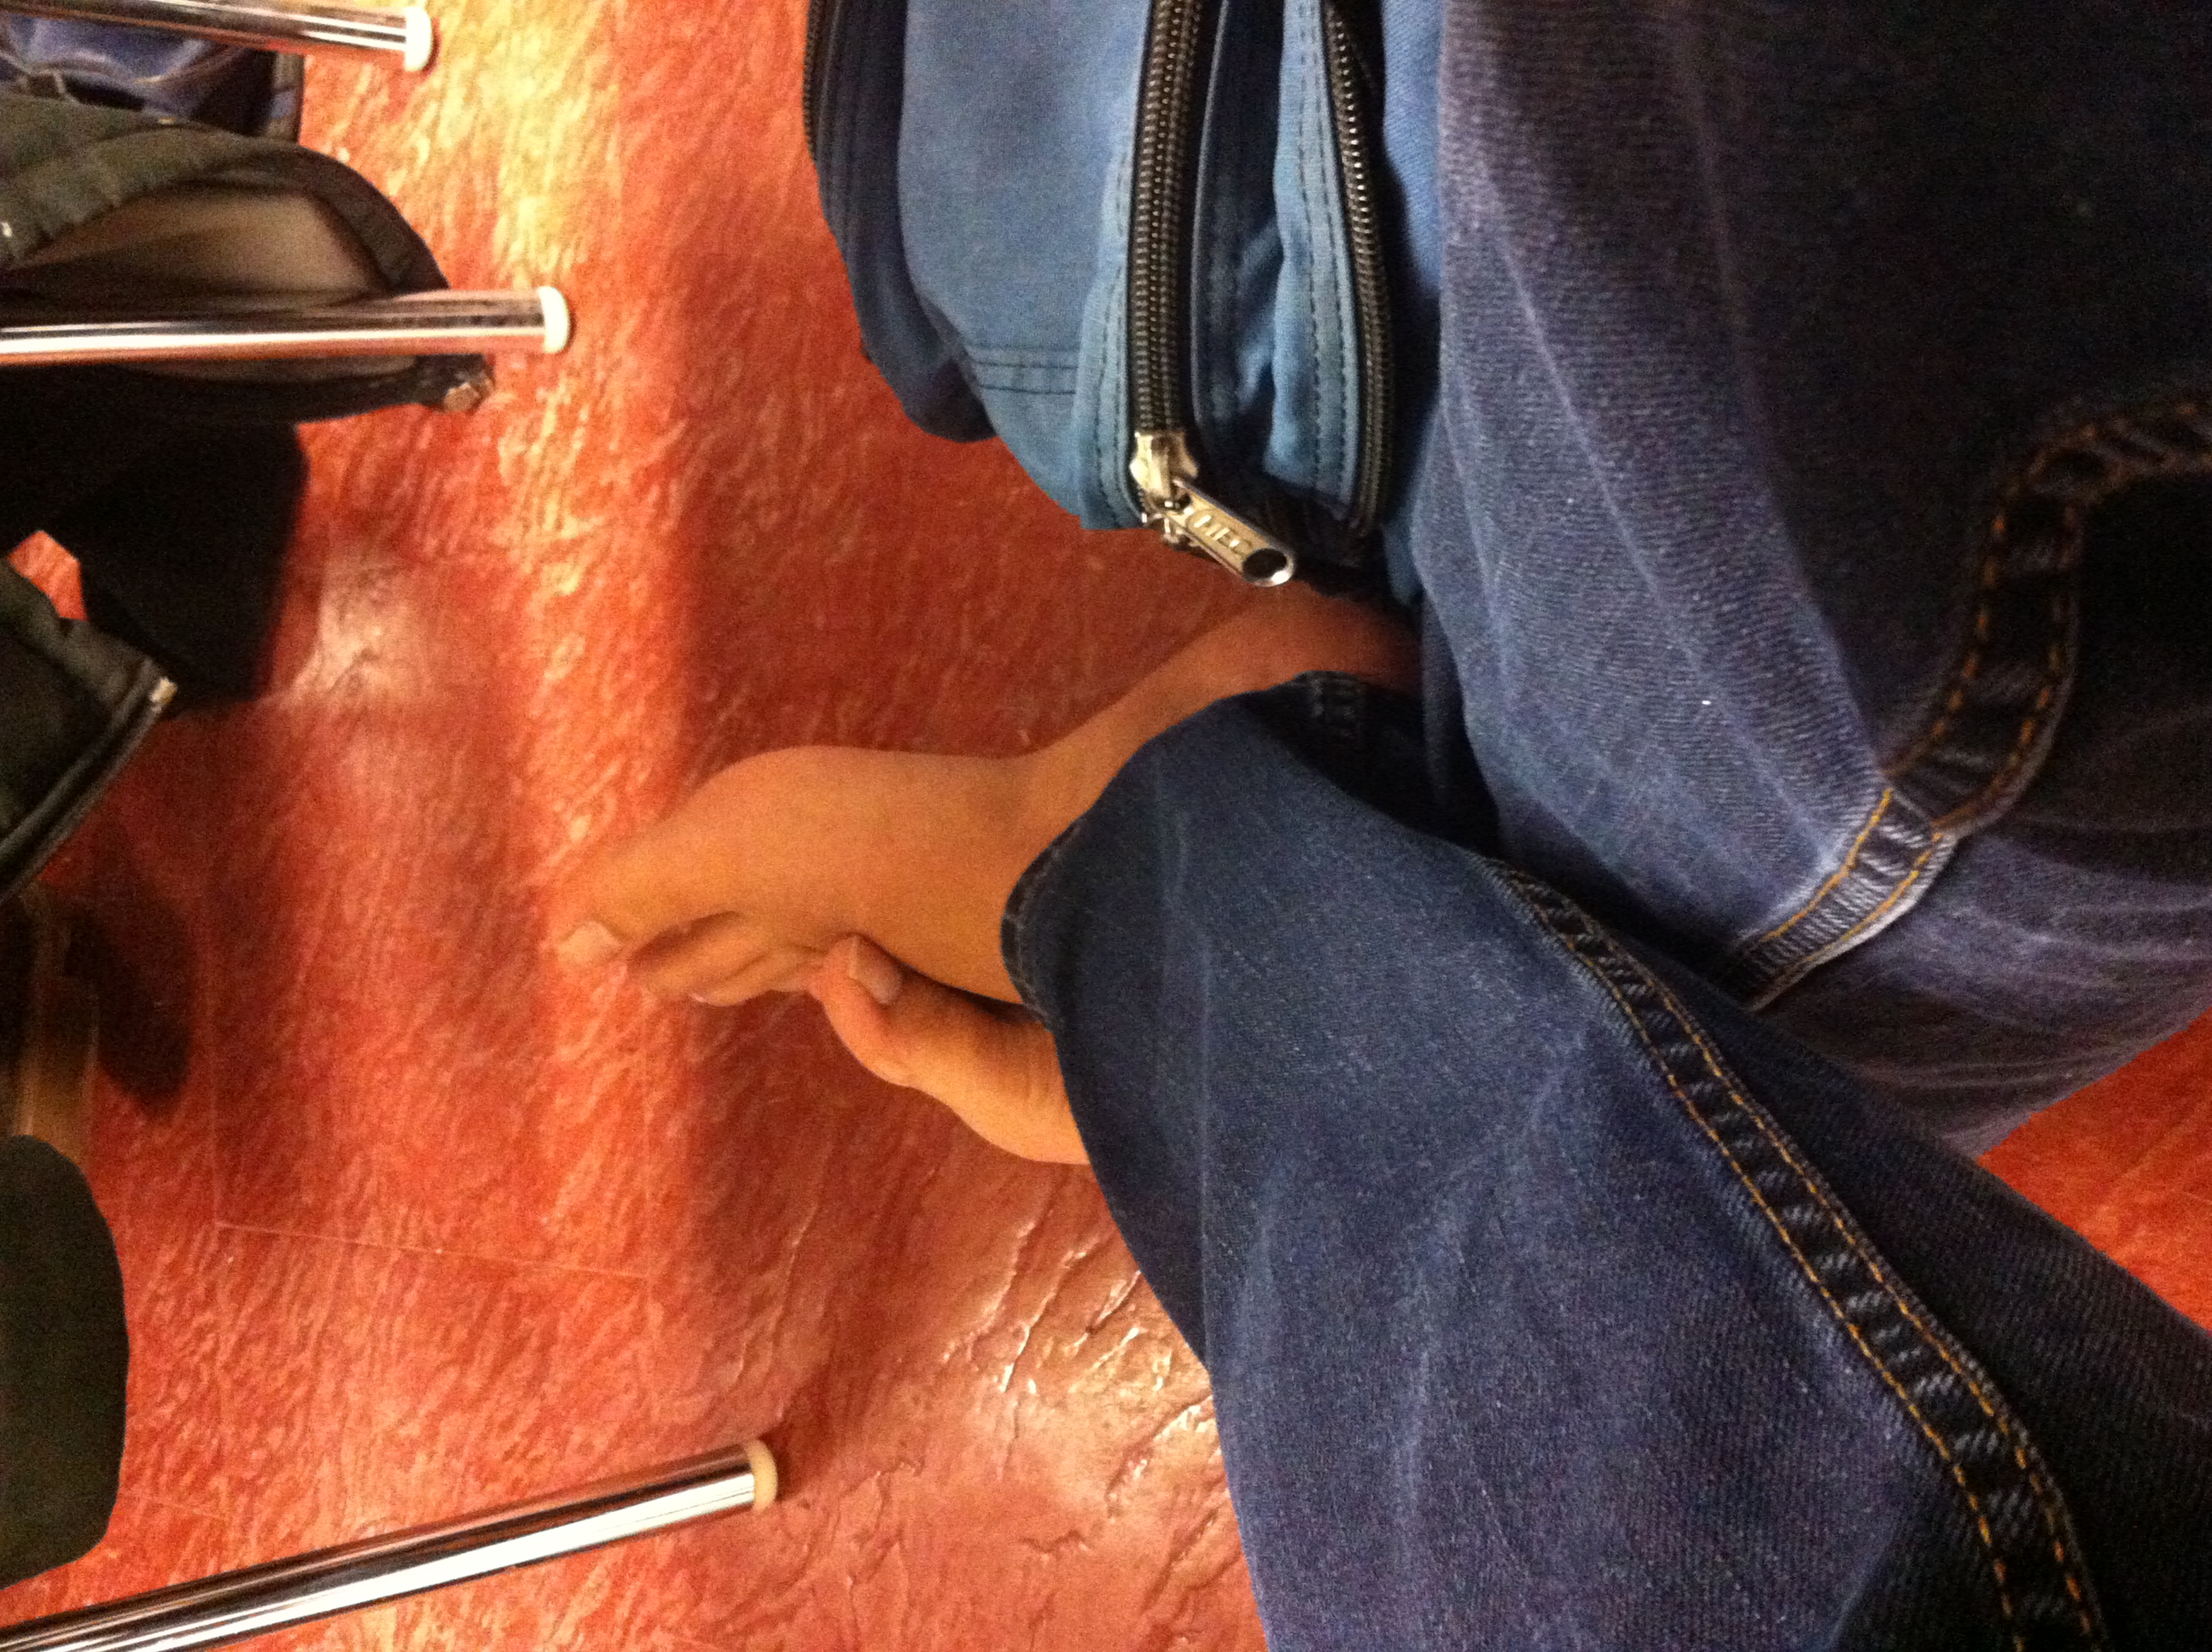 Barefoot in class.